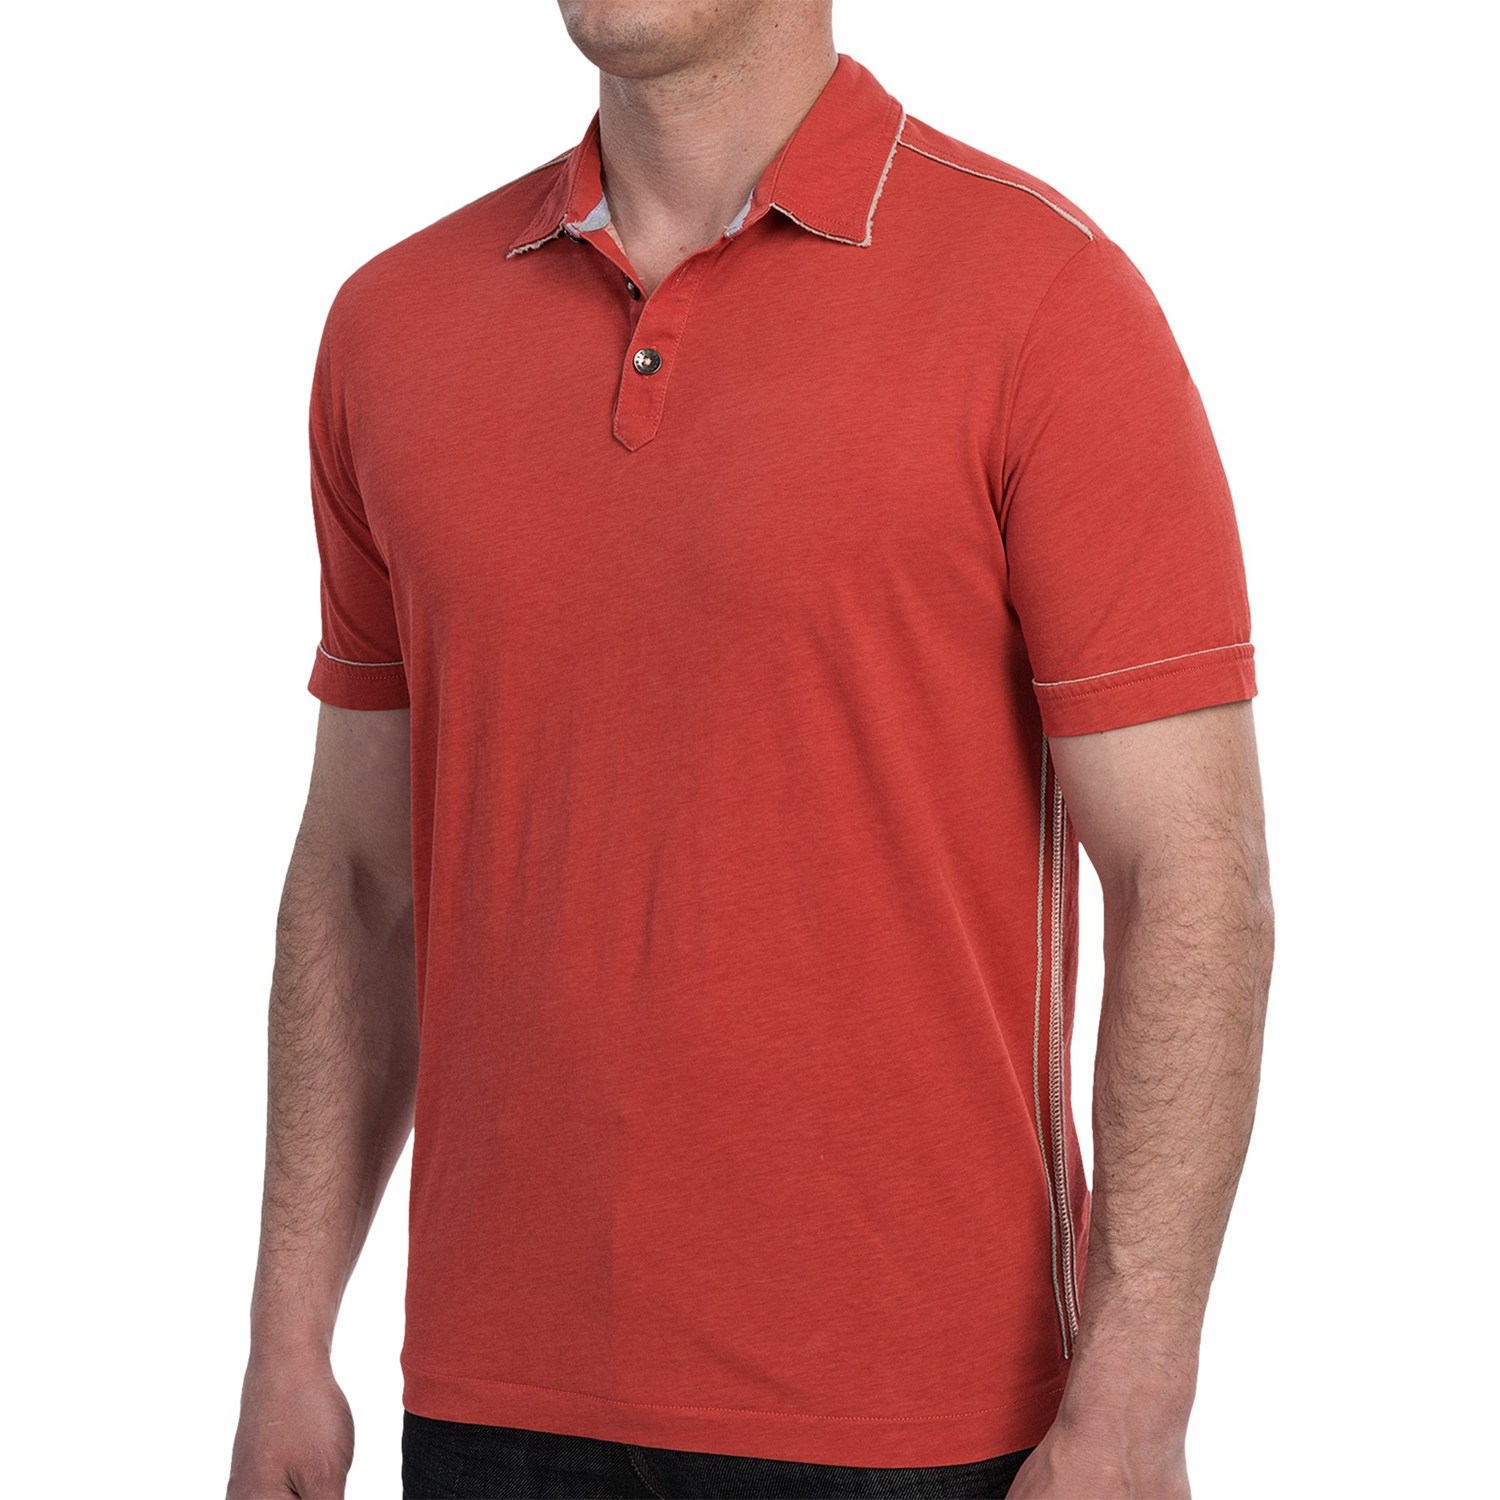 MEN’S HIGH QUALITY SOLID COLOR SINGLE JERSEY POLO SHIRT